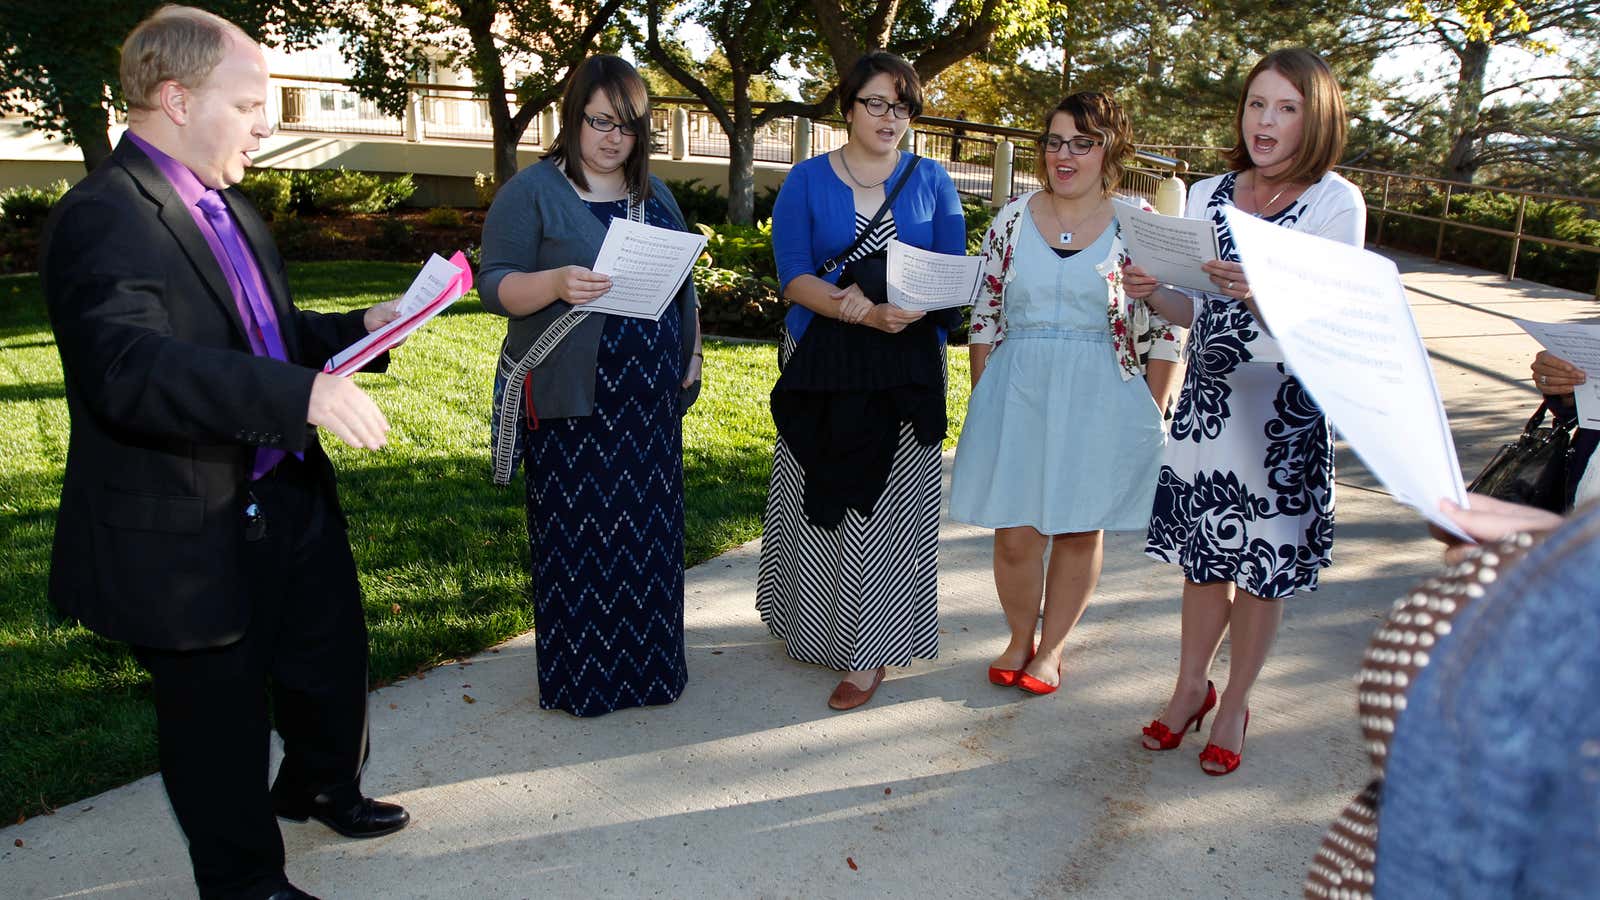 Members of the Mormon group Ordain Women sing a song on the campus of Brigham Young University.